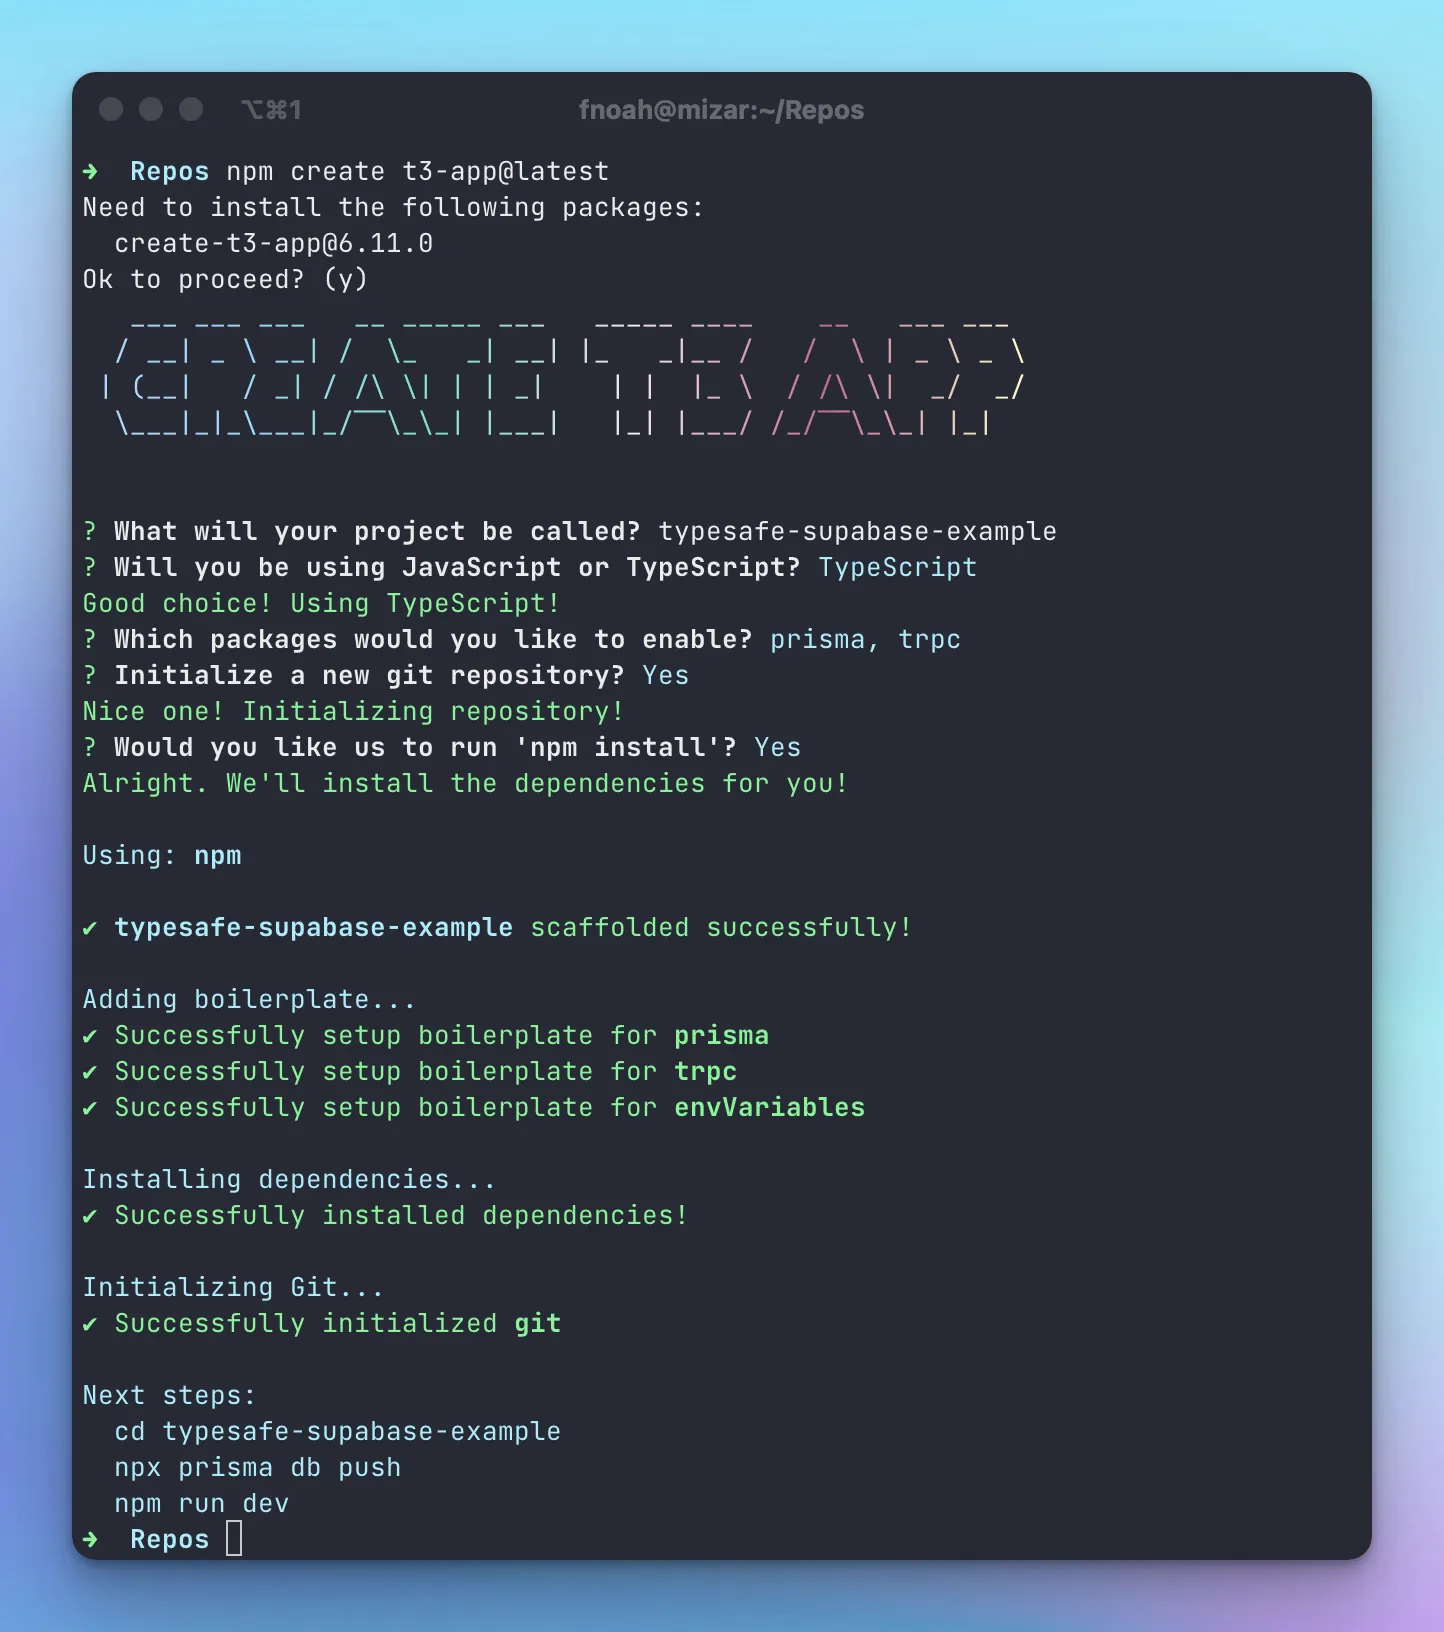 Screenshot of my terminal showing the options descibed above I chose for the create-t3-app configuration.